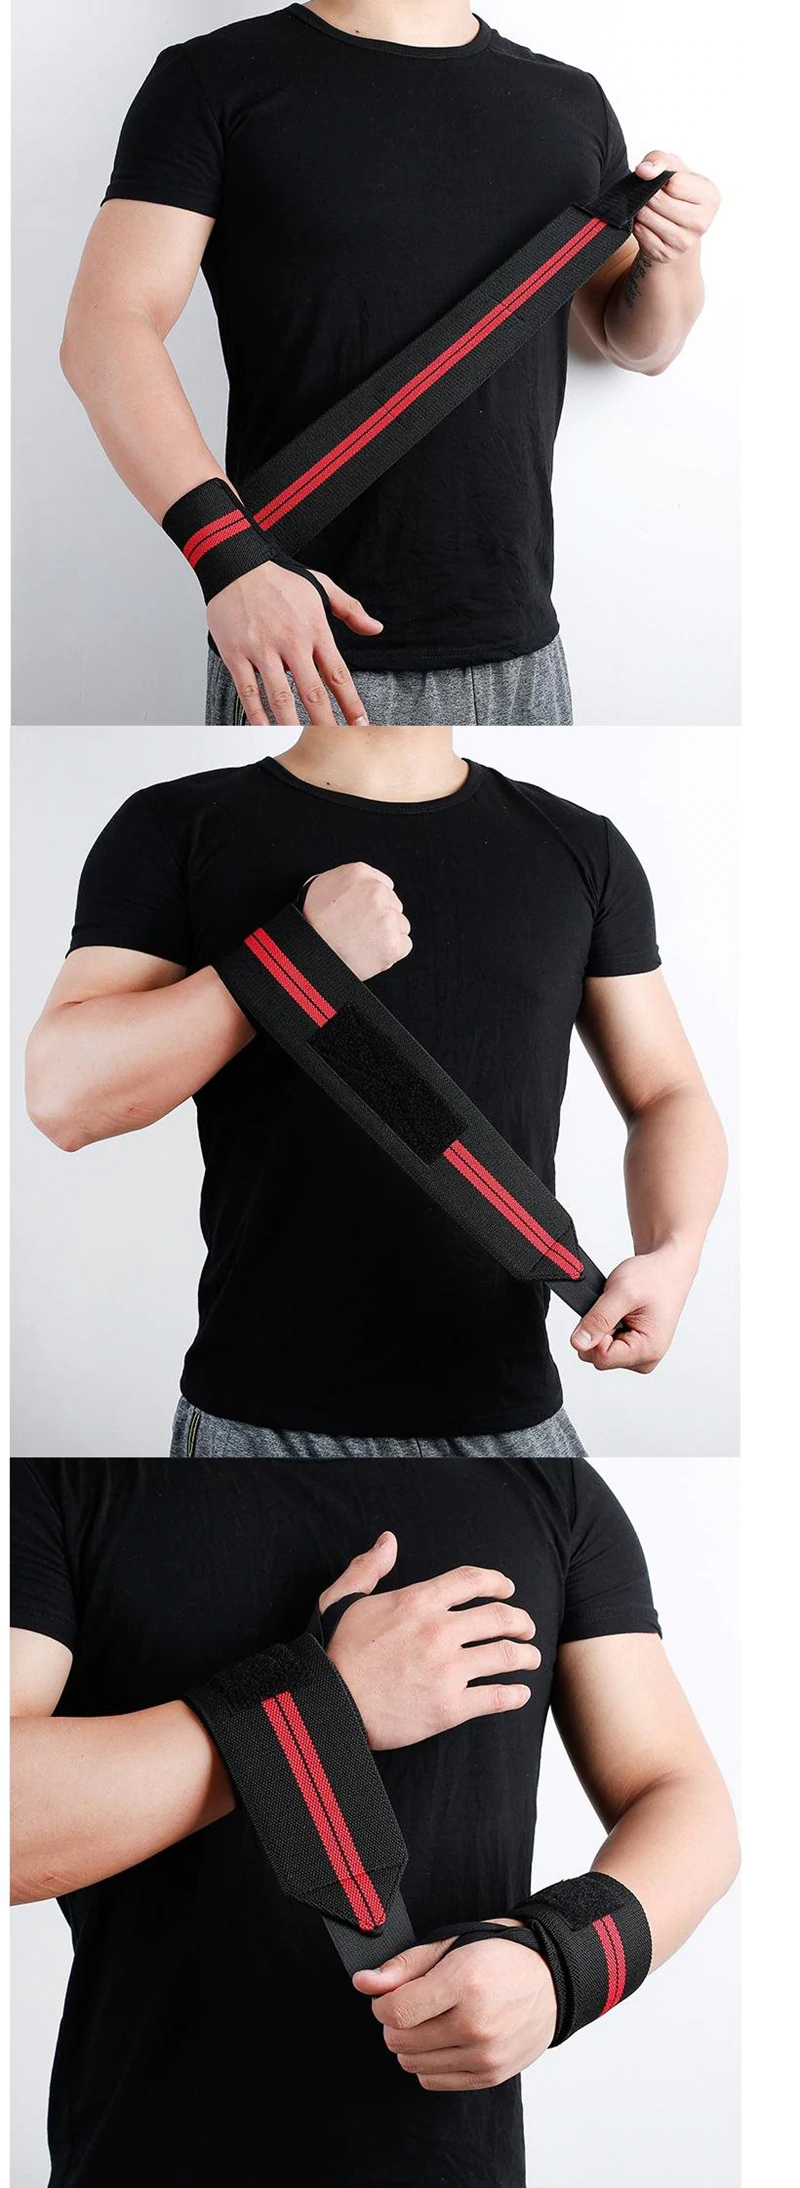 Weight Lifting Strap Fitness Gym Sport Wrist Wrap Bandage Hand Support Wristband (5)